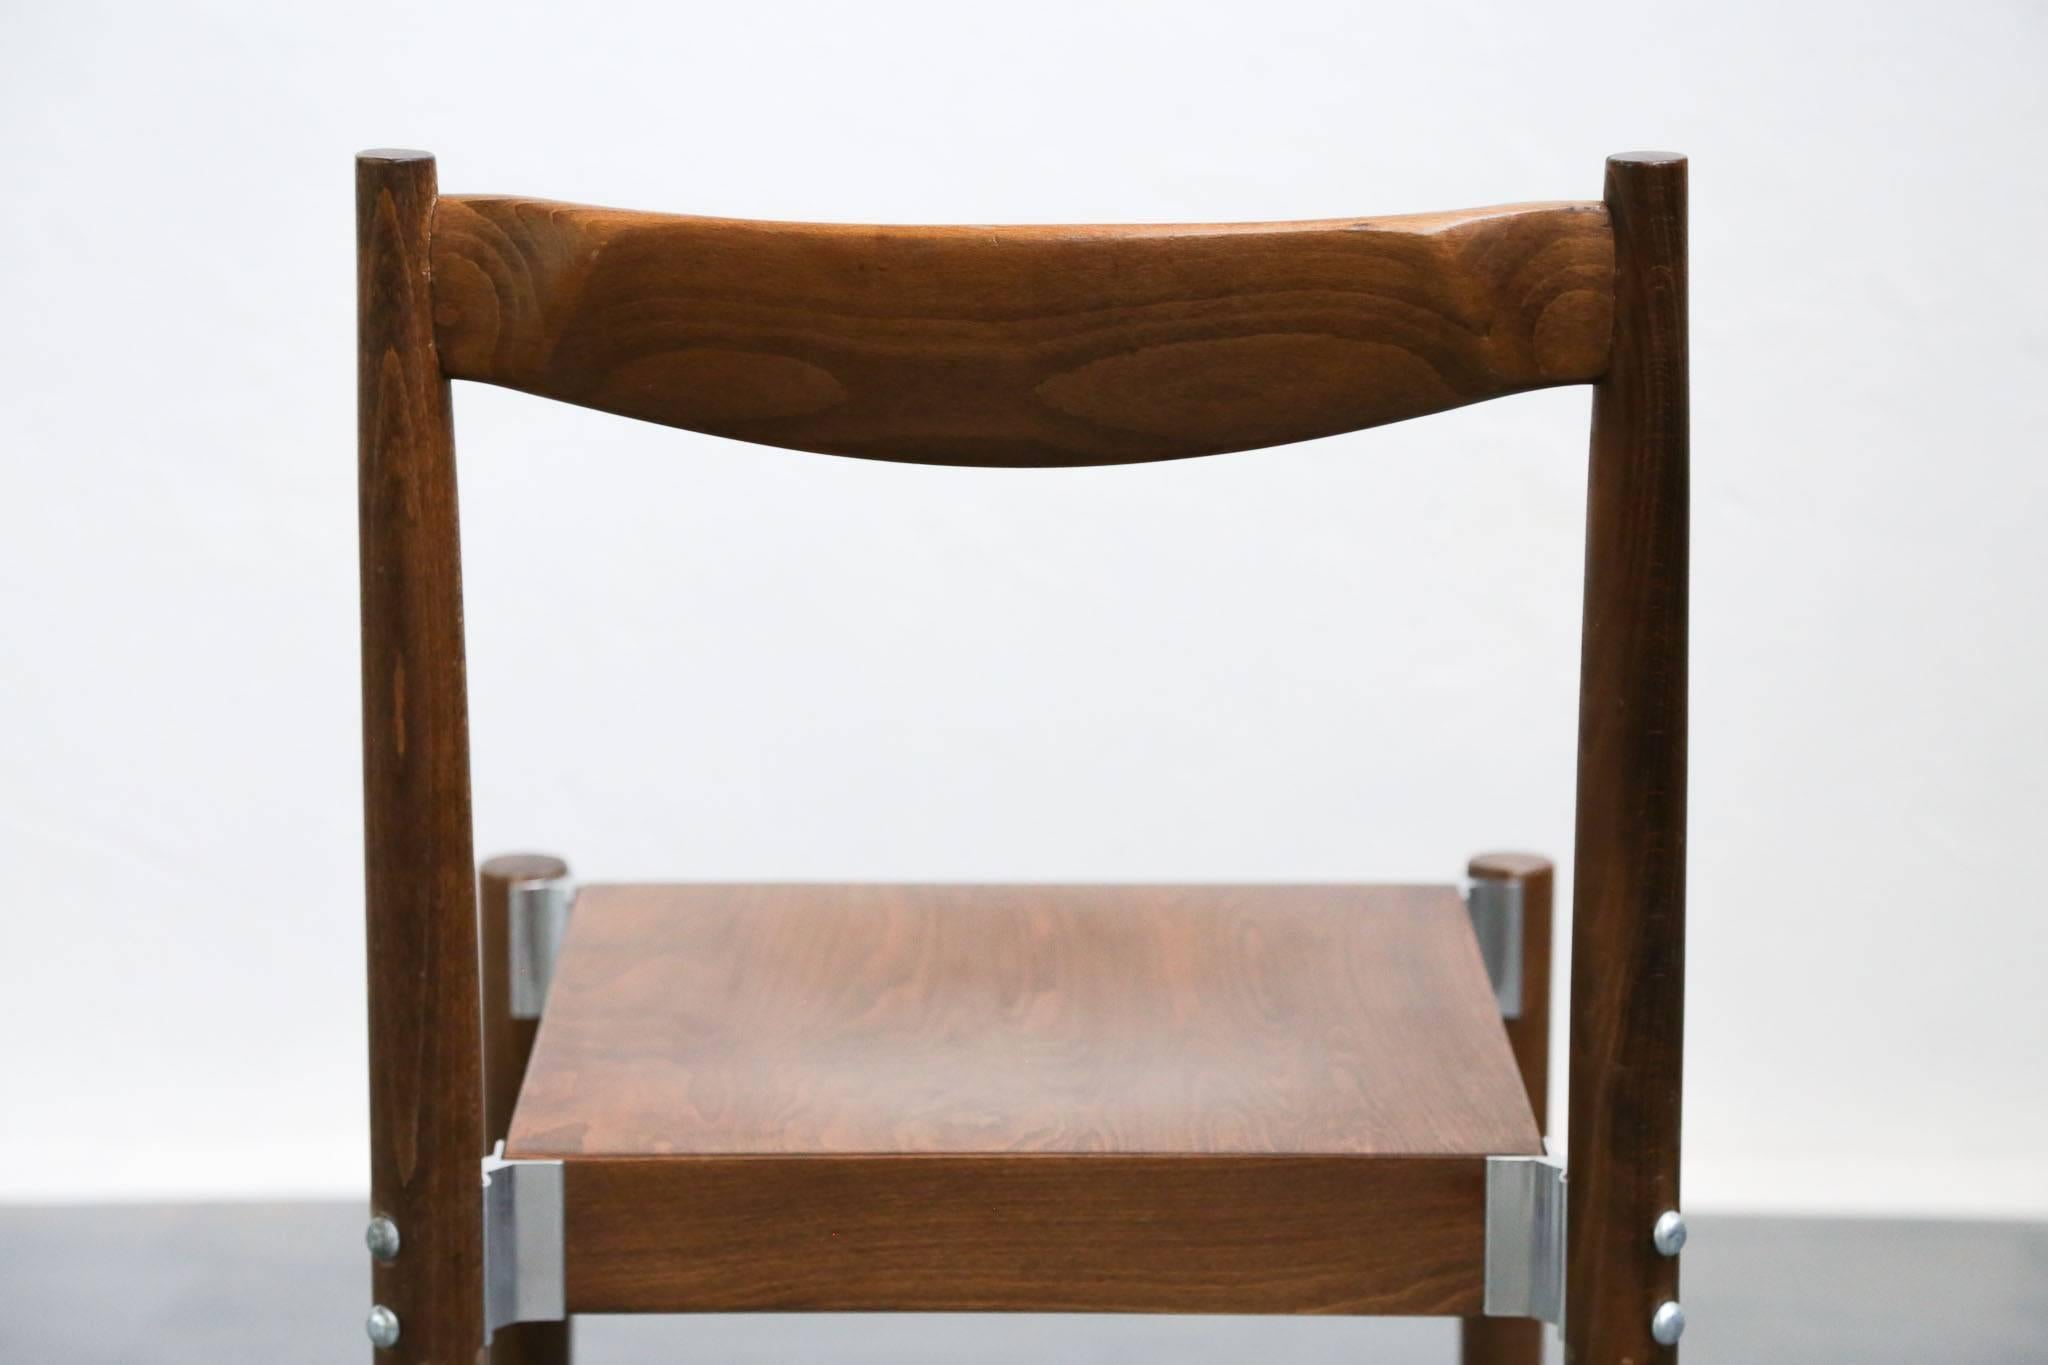 Rare set of 14 chairs.
Scandinavian style, metal and wood.